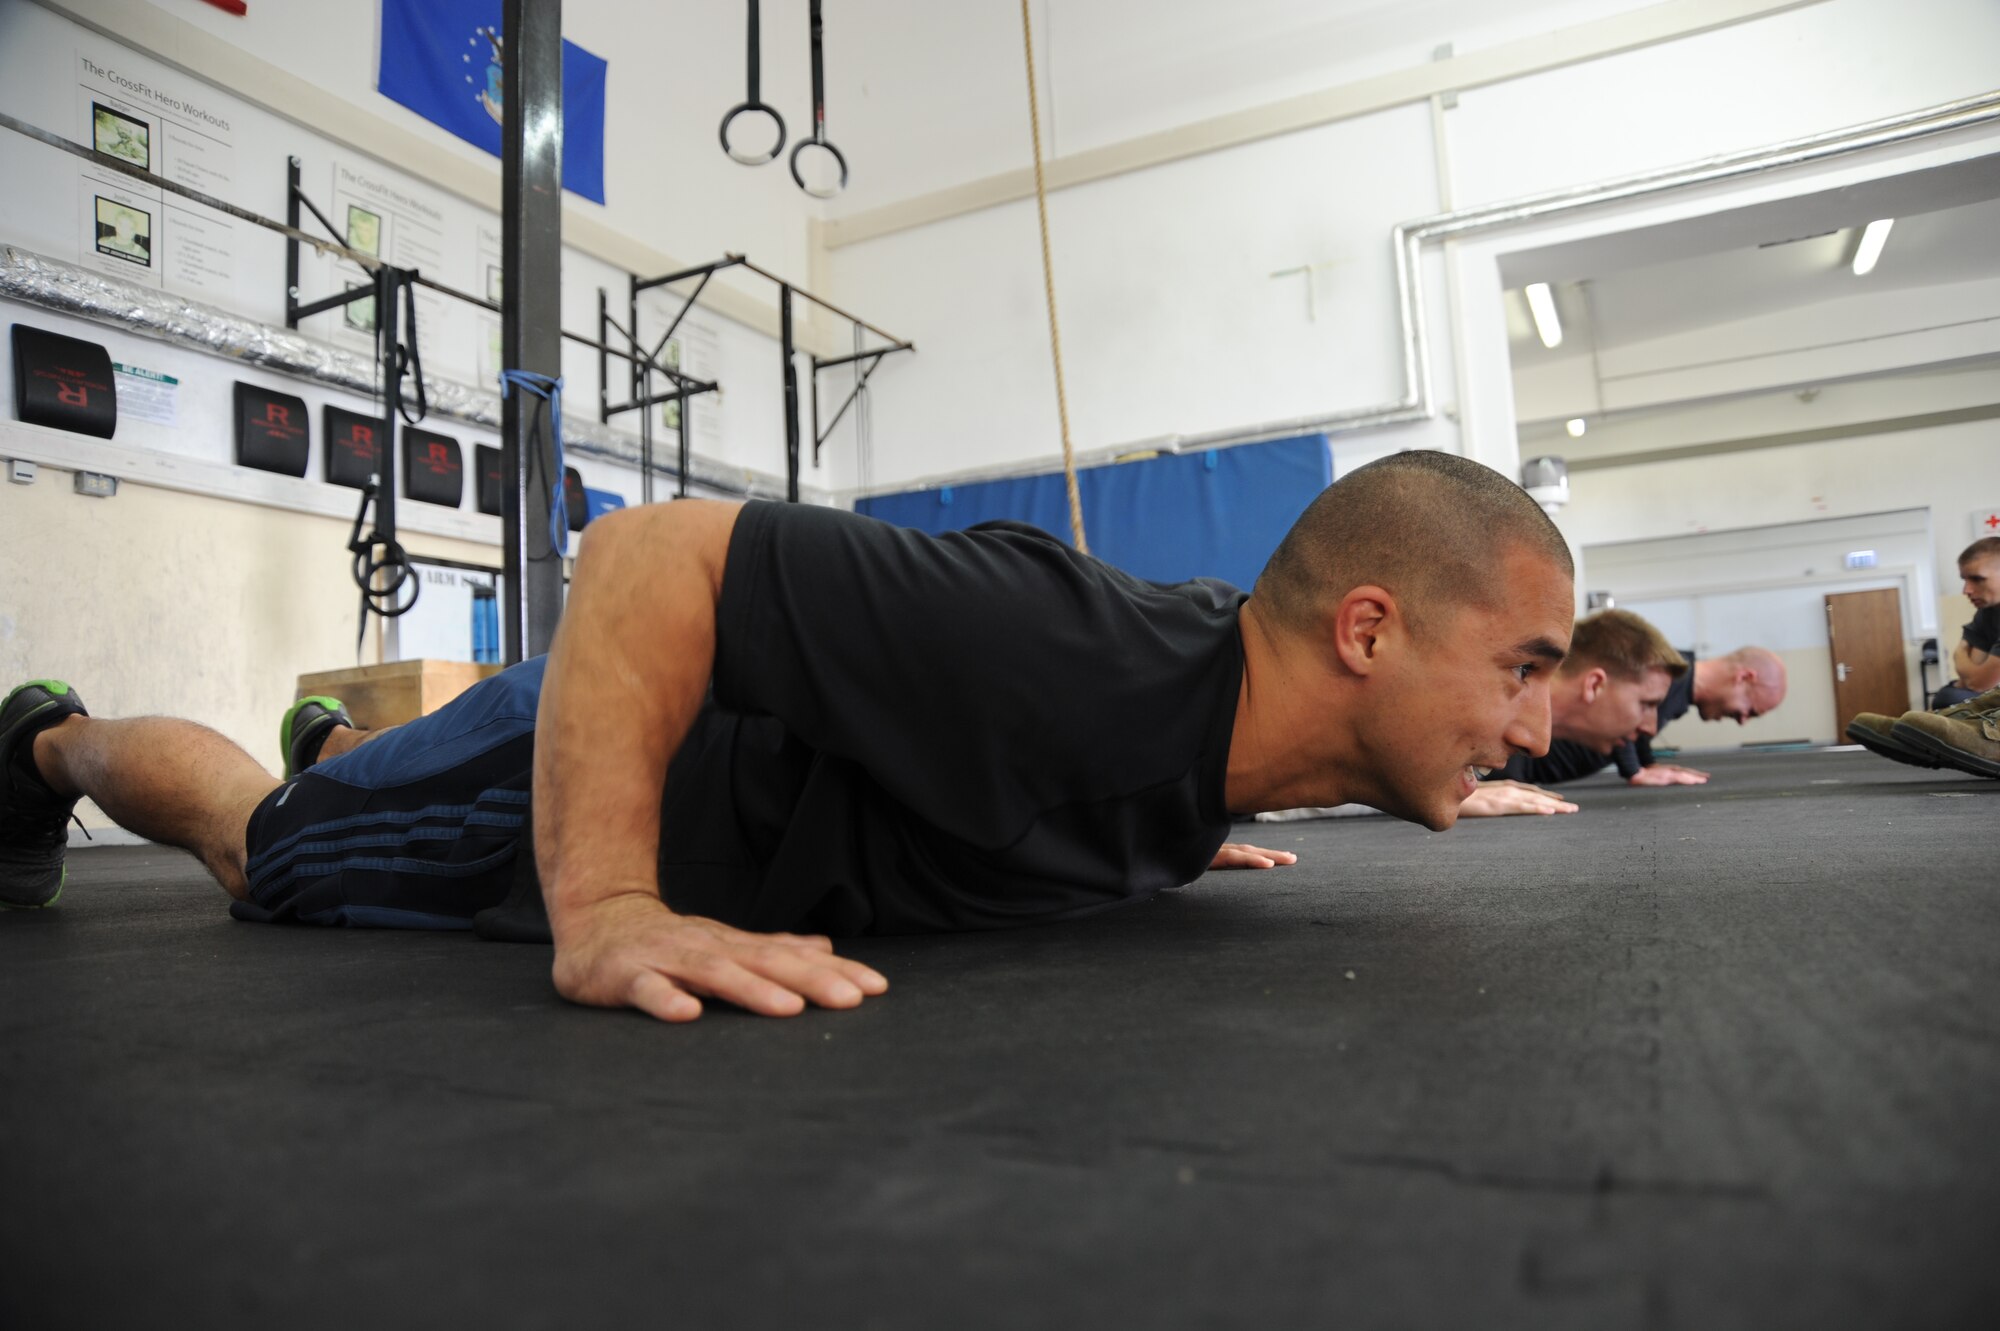 U.S. Air Force Tech. Sgt. James Yerger, 52nd Fighter Wing Safety office ground safety manager, competes in the pushup event during the Wing Staff Agencies Iron Airman competition May 23, 2014, at Spangdahlem Air Base, Germany. The event showcased seven exercises to determine the overall male and female winners. (U.S. Air Force photo by Airman 1st Class Dylan Nuckolls/Released)